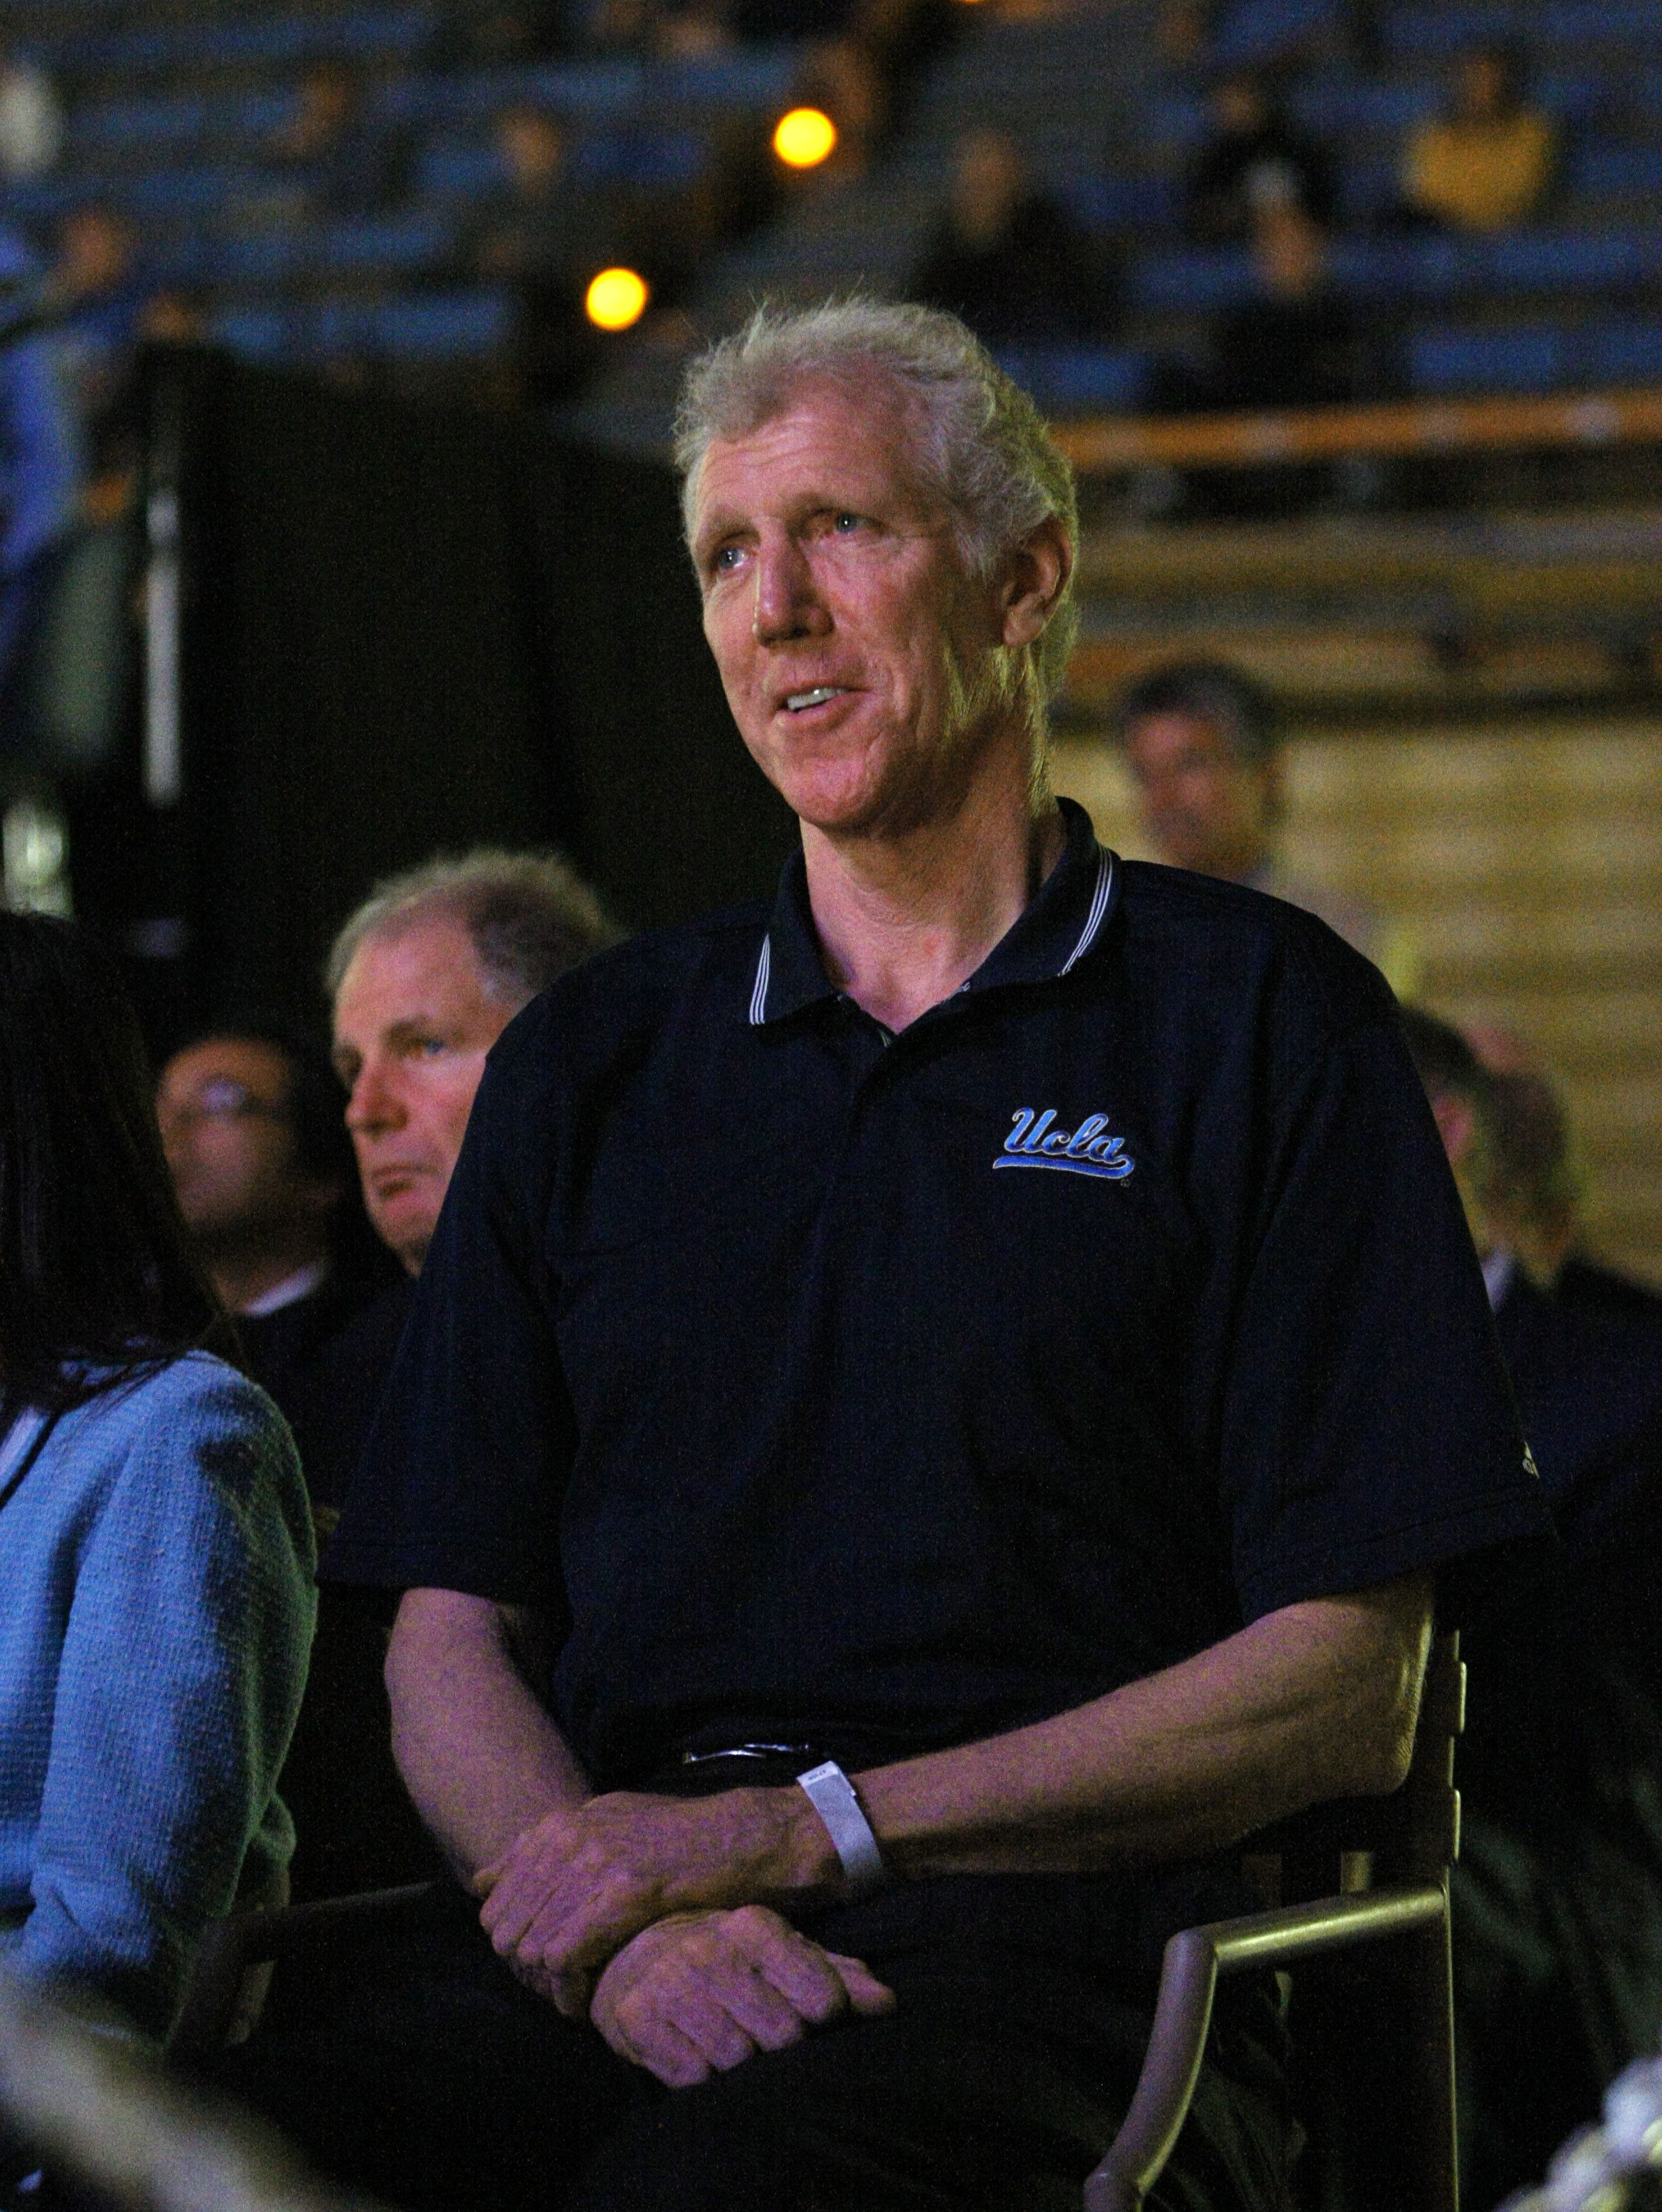 WESTWOOD, CA - JUNE 26:  Former UCLA and NBA player Bill Walton attends the memorial for former UCLA basketball coach John Wooden June 26, 2010 at Pauley Pavilion on the University of California Los Angeles campus in Westwood, California. Wooden died June